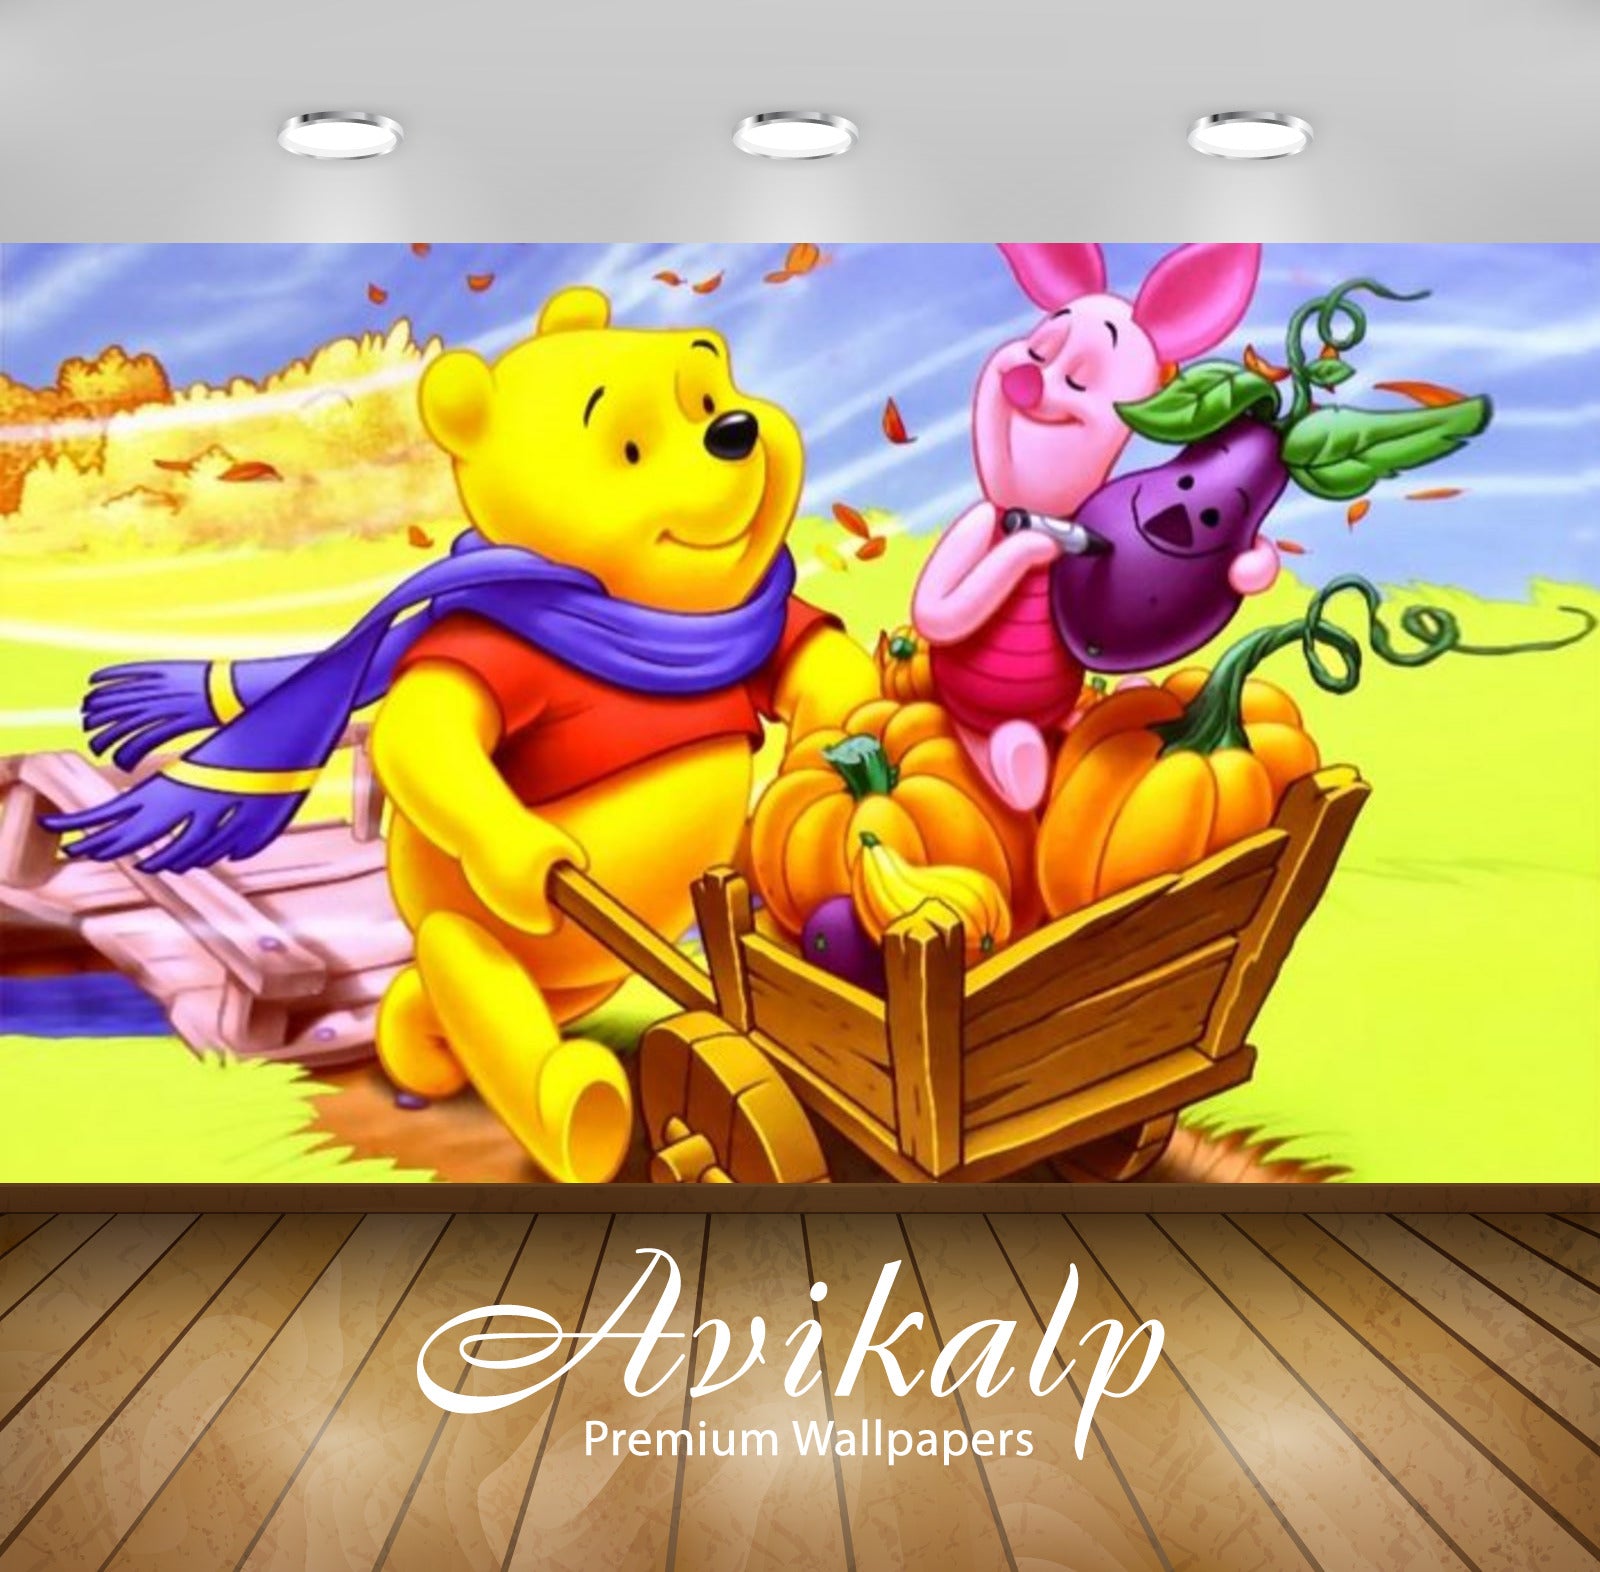 Avikalp Exclusive Awi2317 Winnie The Pooh and Piglet Autumn harvest to fruit Full HD Wallpapers for